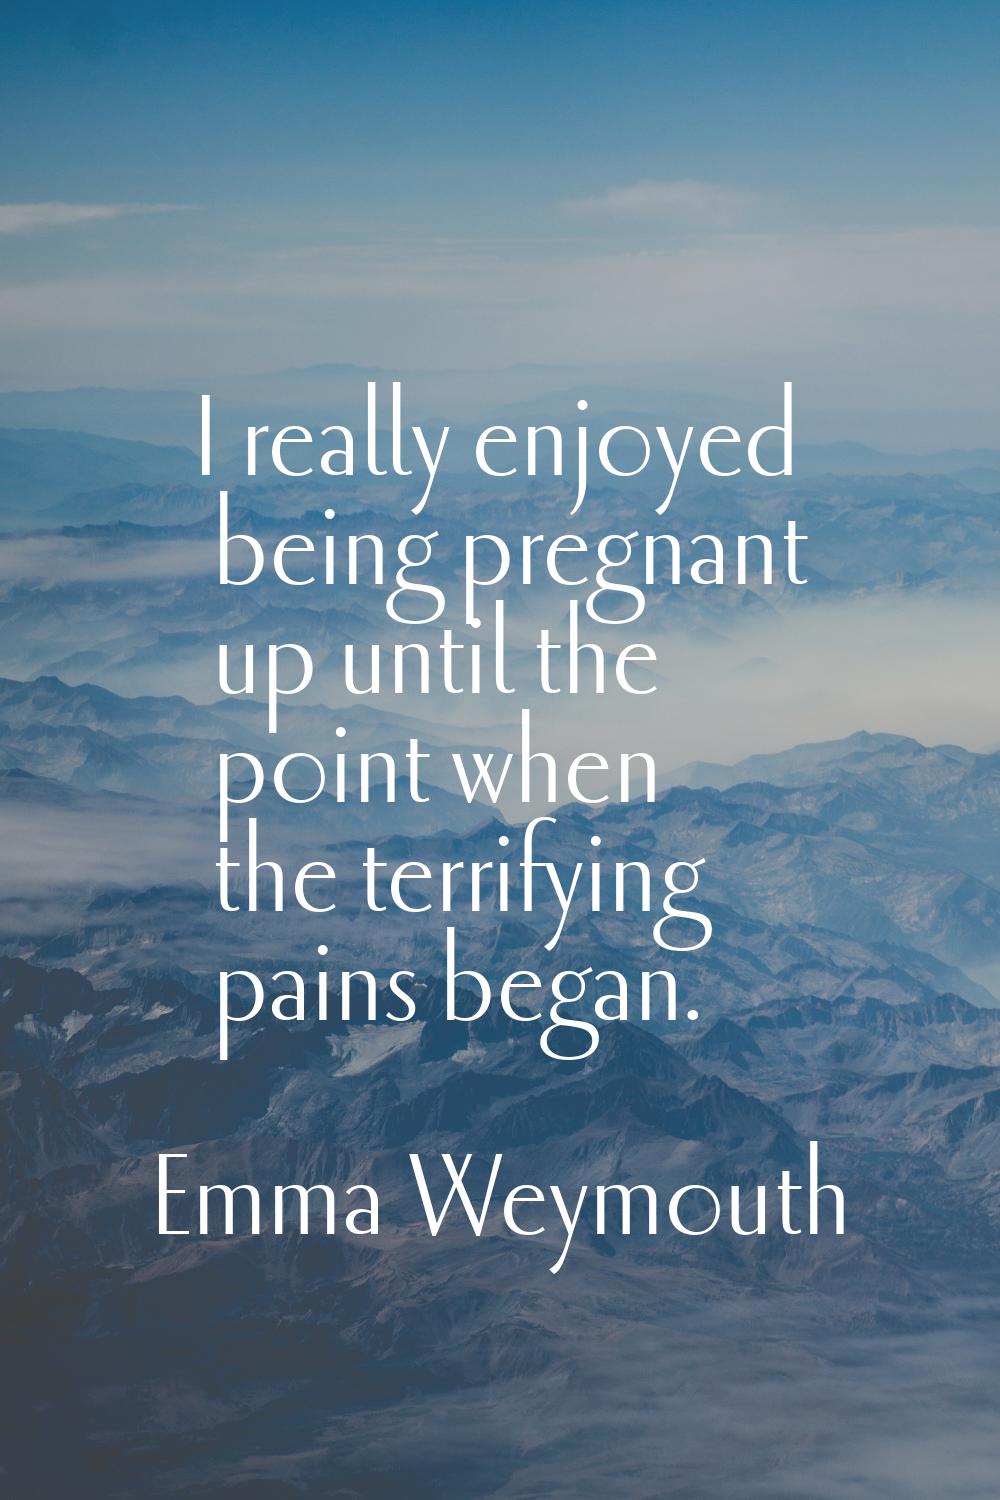 I really enjoyed being pregnant up until the point when the terrifying pains began.